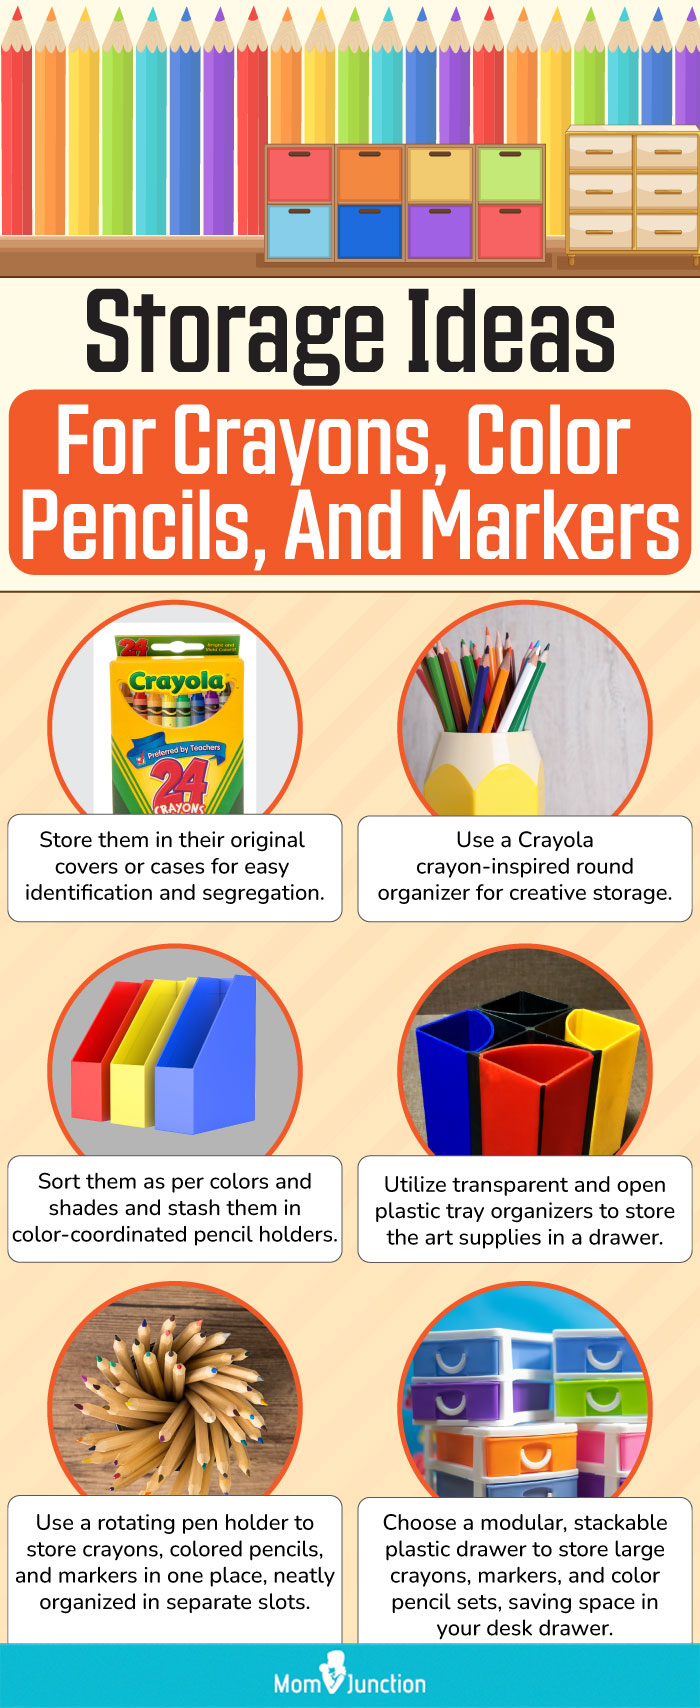 Storage Ideas For Crayons, Color Pencils, And Markers (infographic)